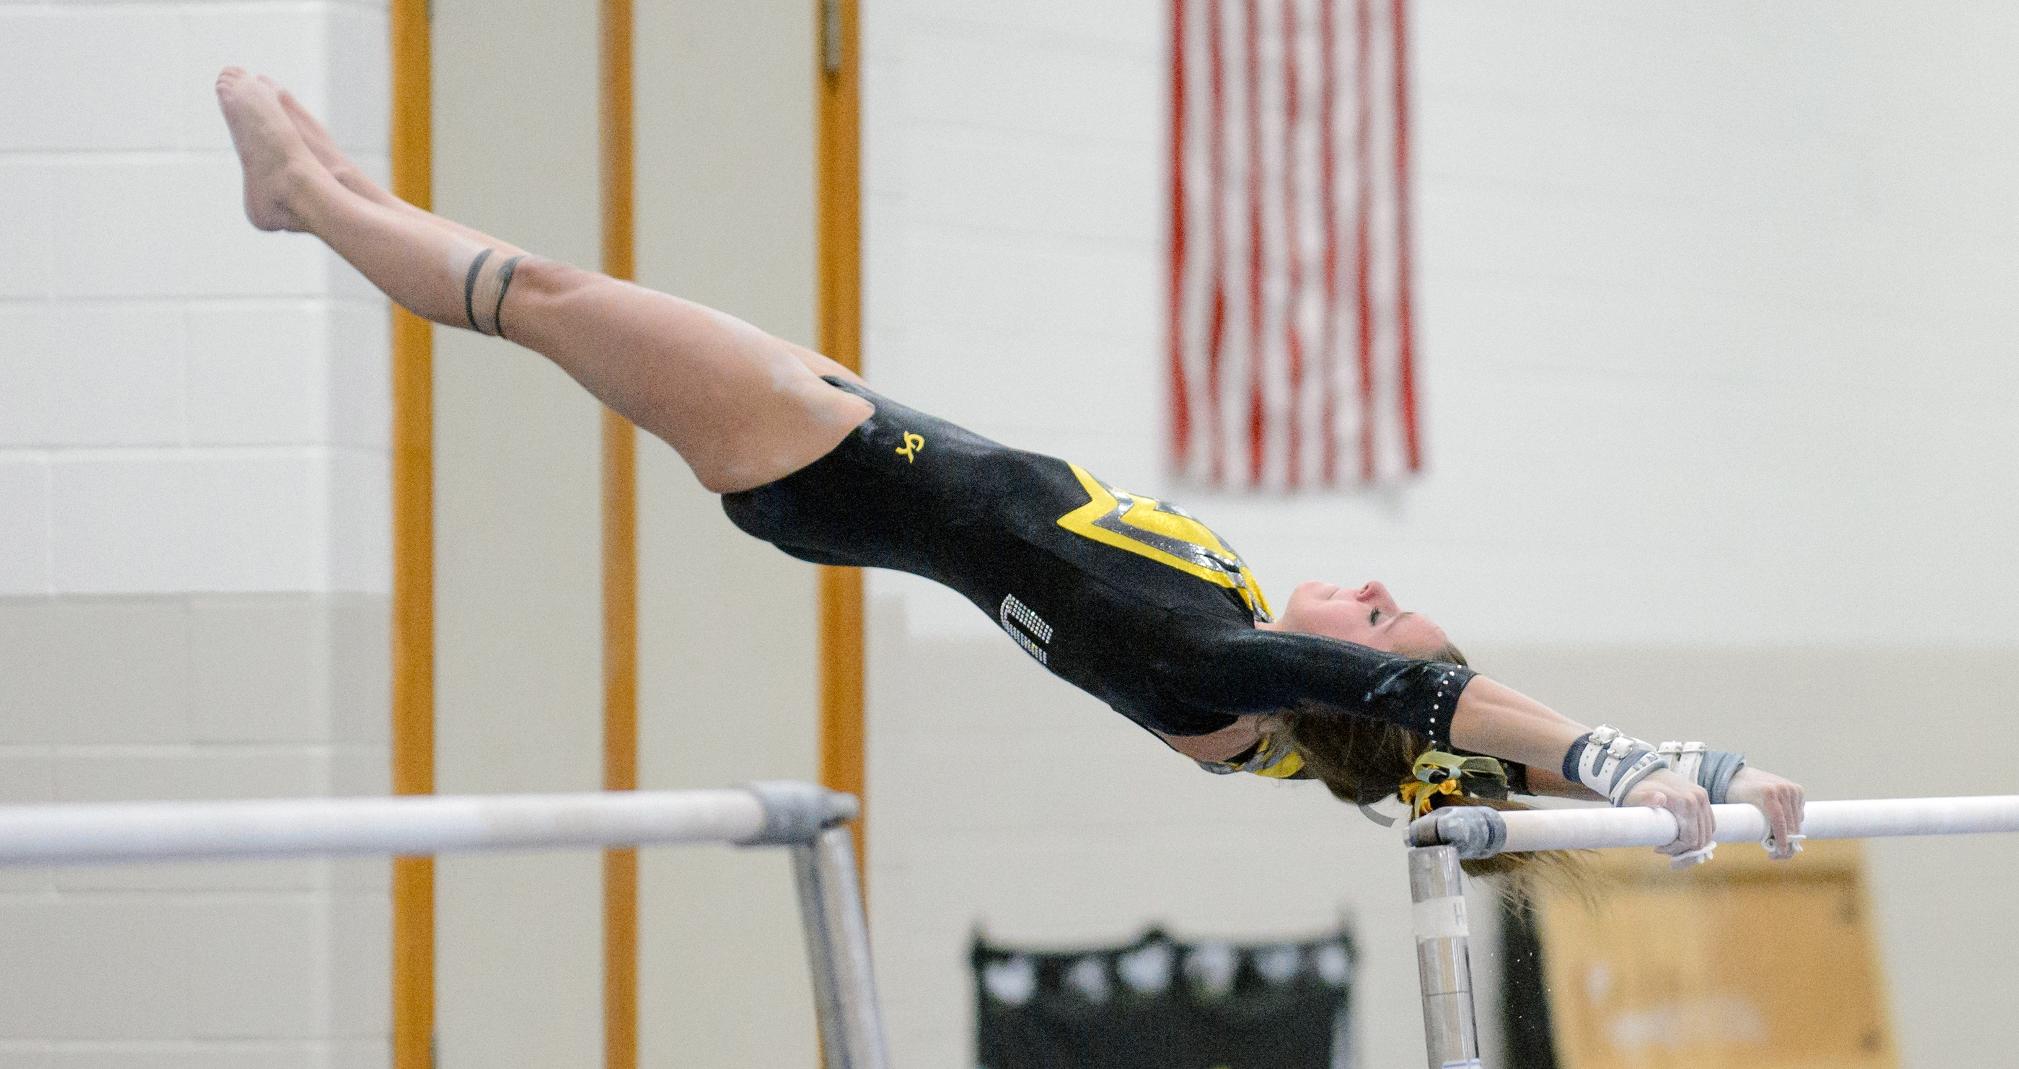 Emily Ryan finished ninth on both the uneven bars and vault.